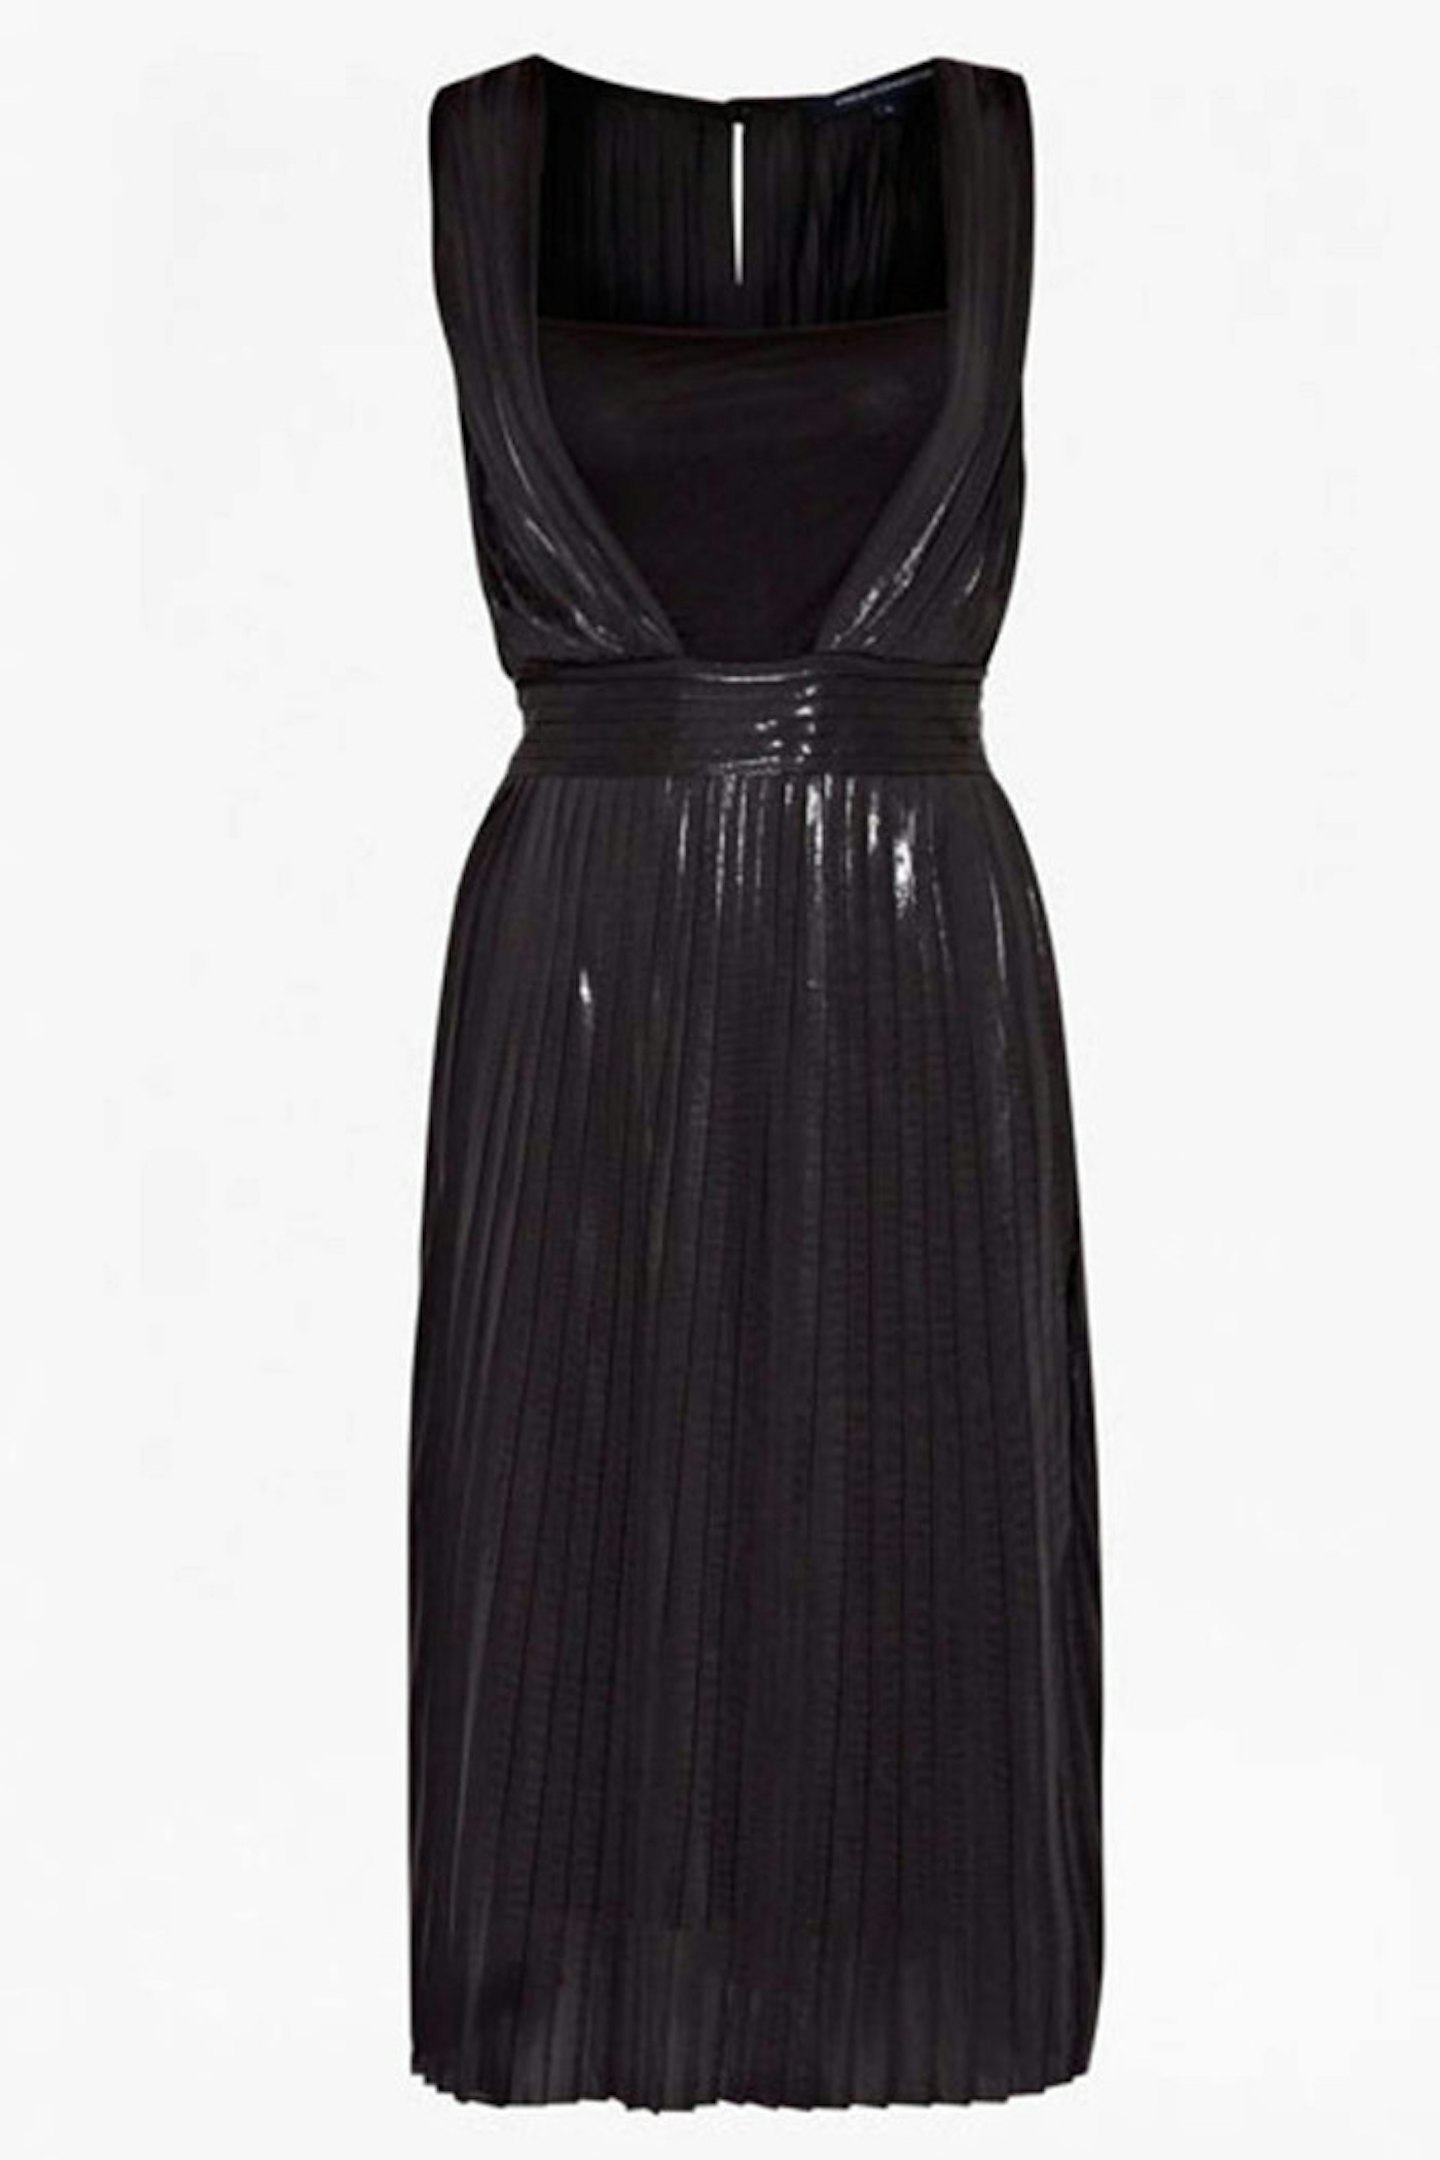 Metal grey foil pleated dress, £120, French Connection